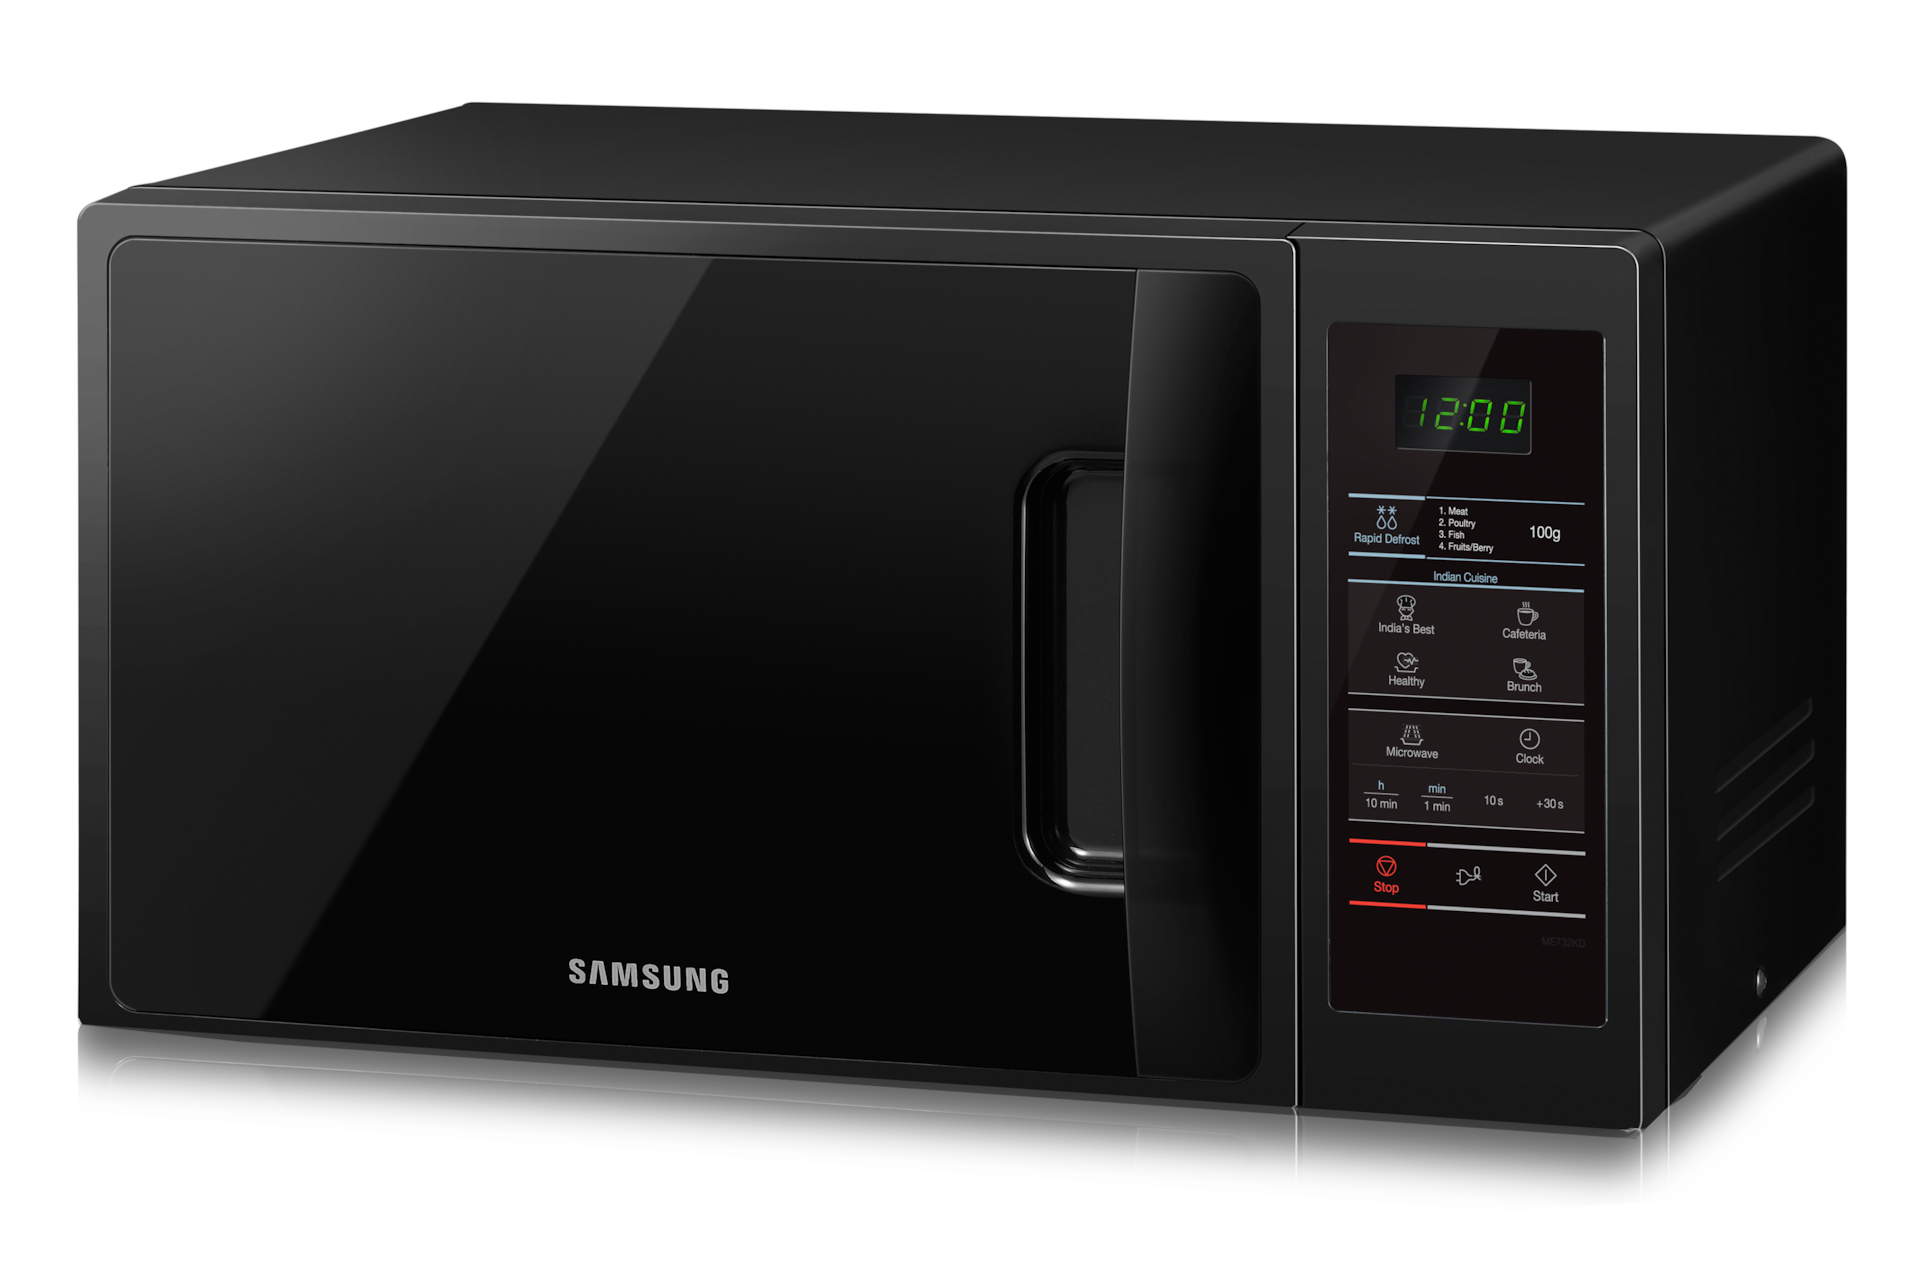 Samsung Microwave Oven Solo Price India, Best Solo Microwave Specs